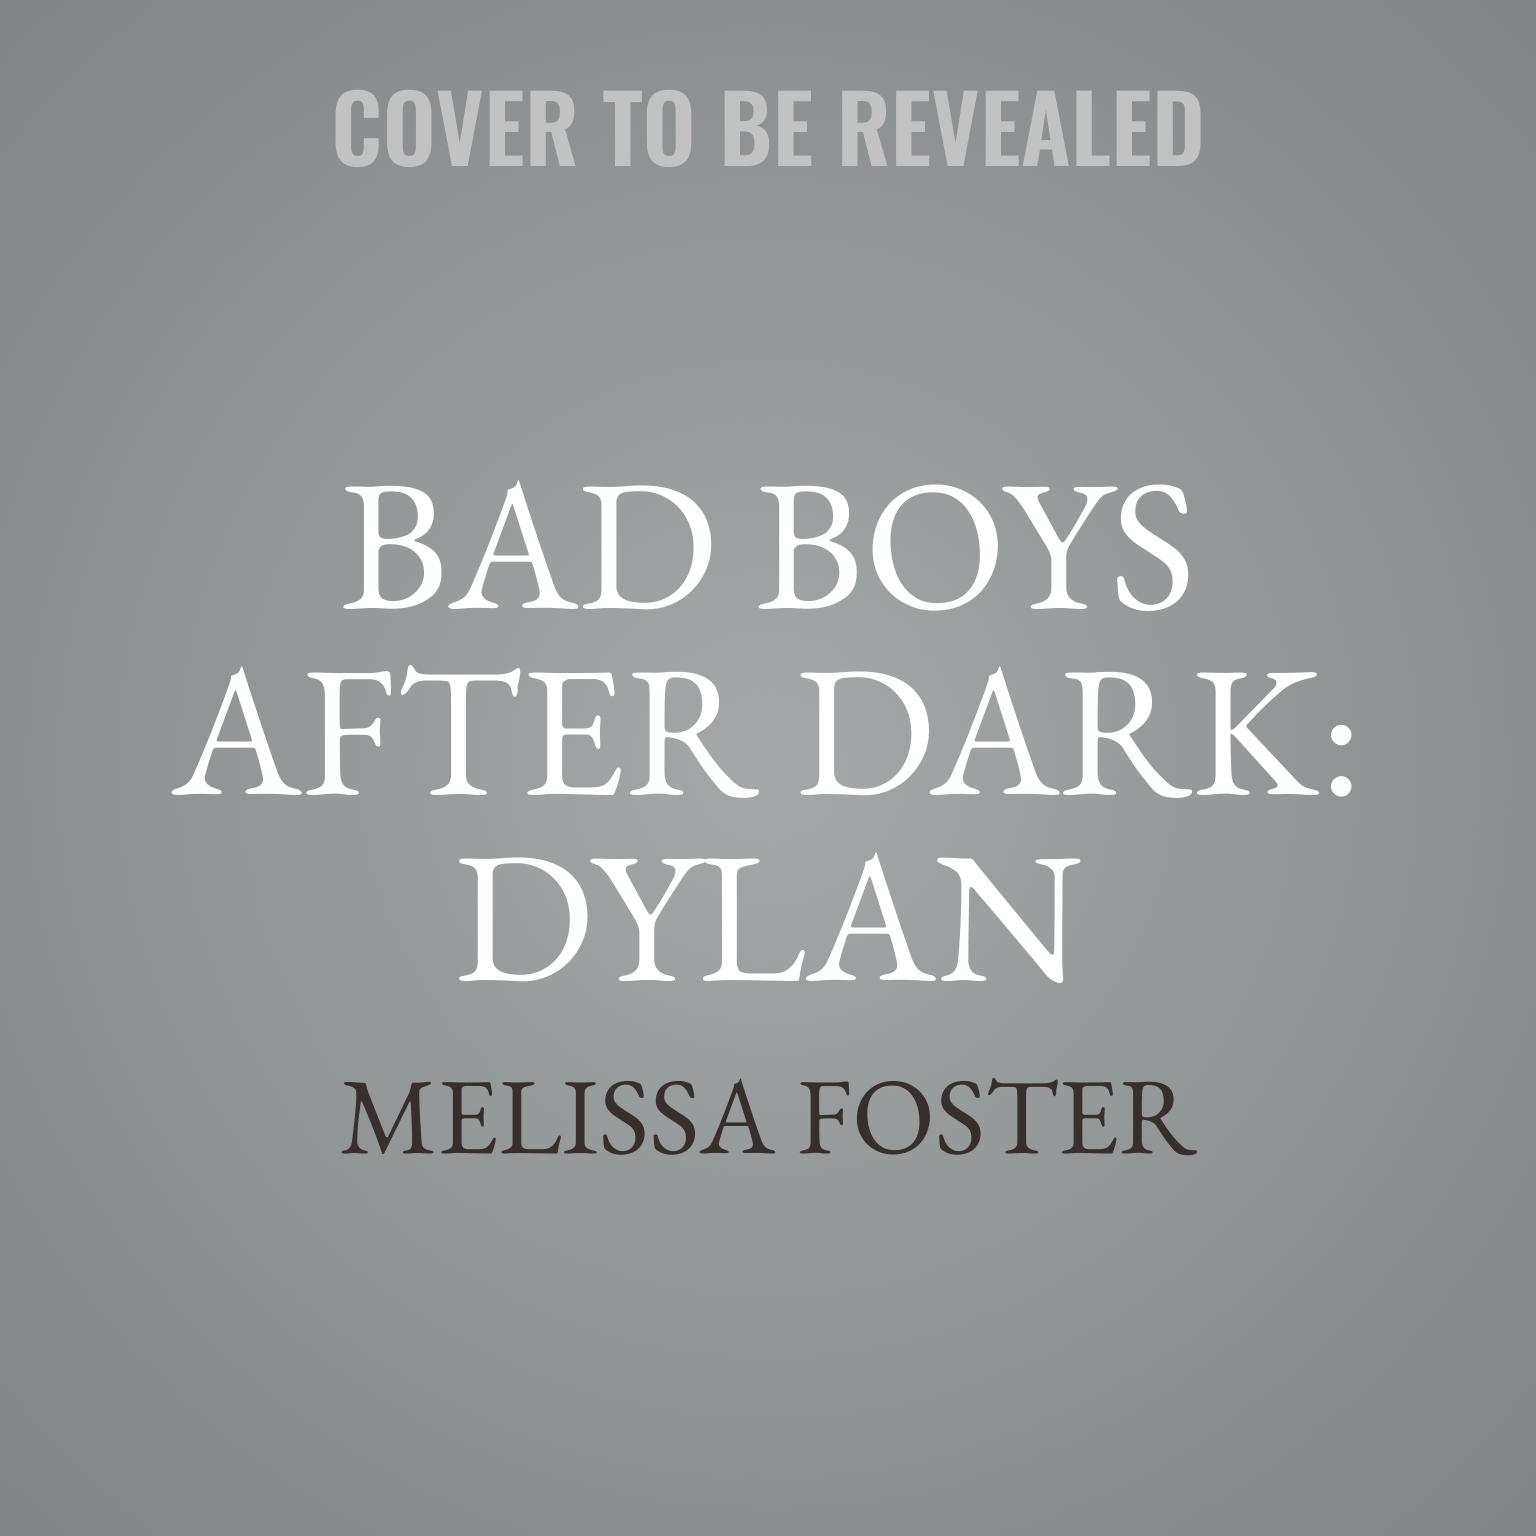 Bad Boys After Dark: Dylan Audiobook, by Melissa Foster